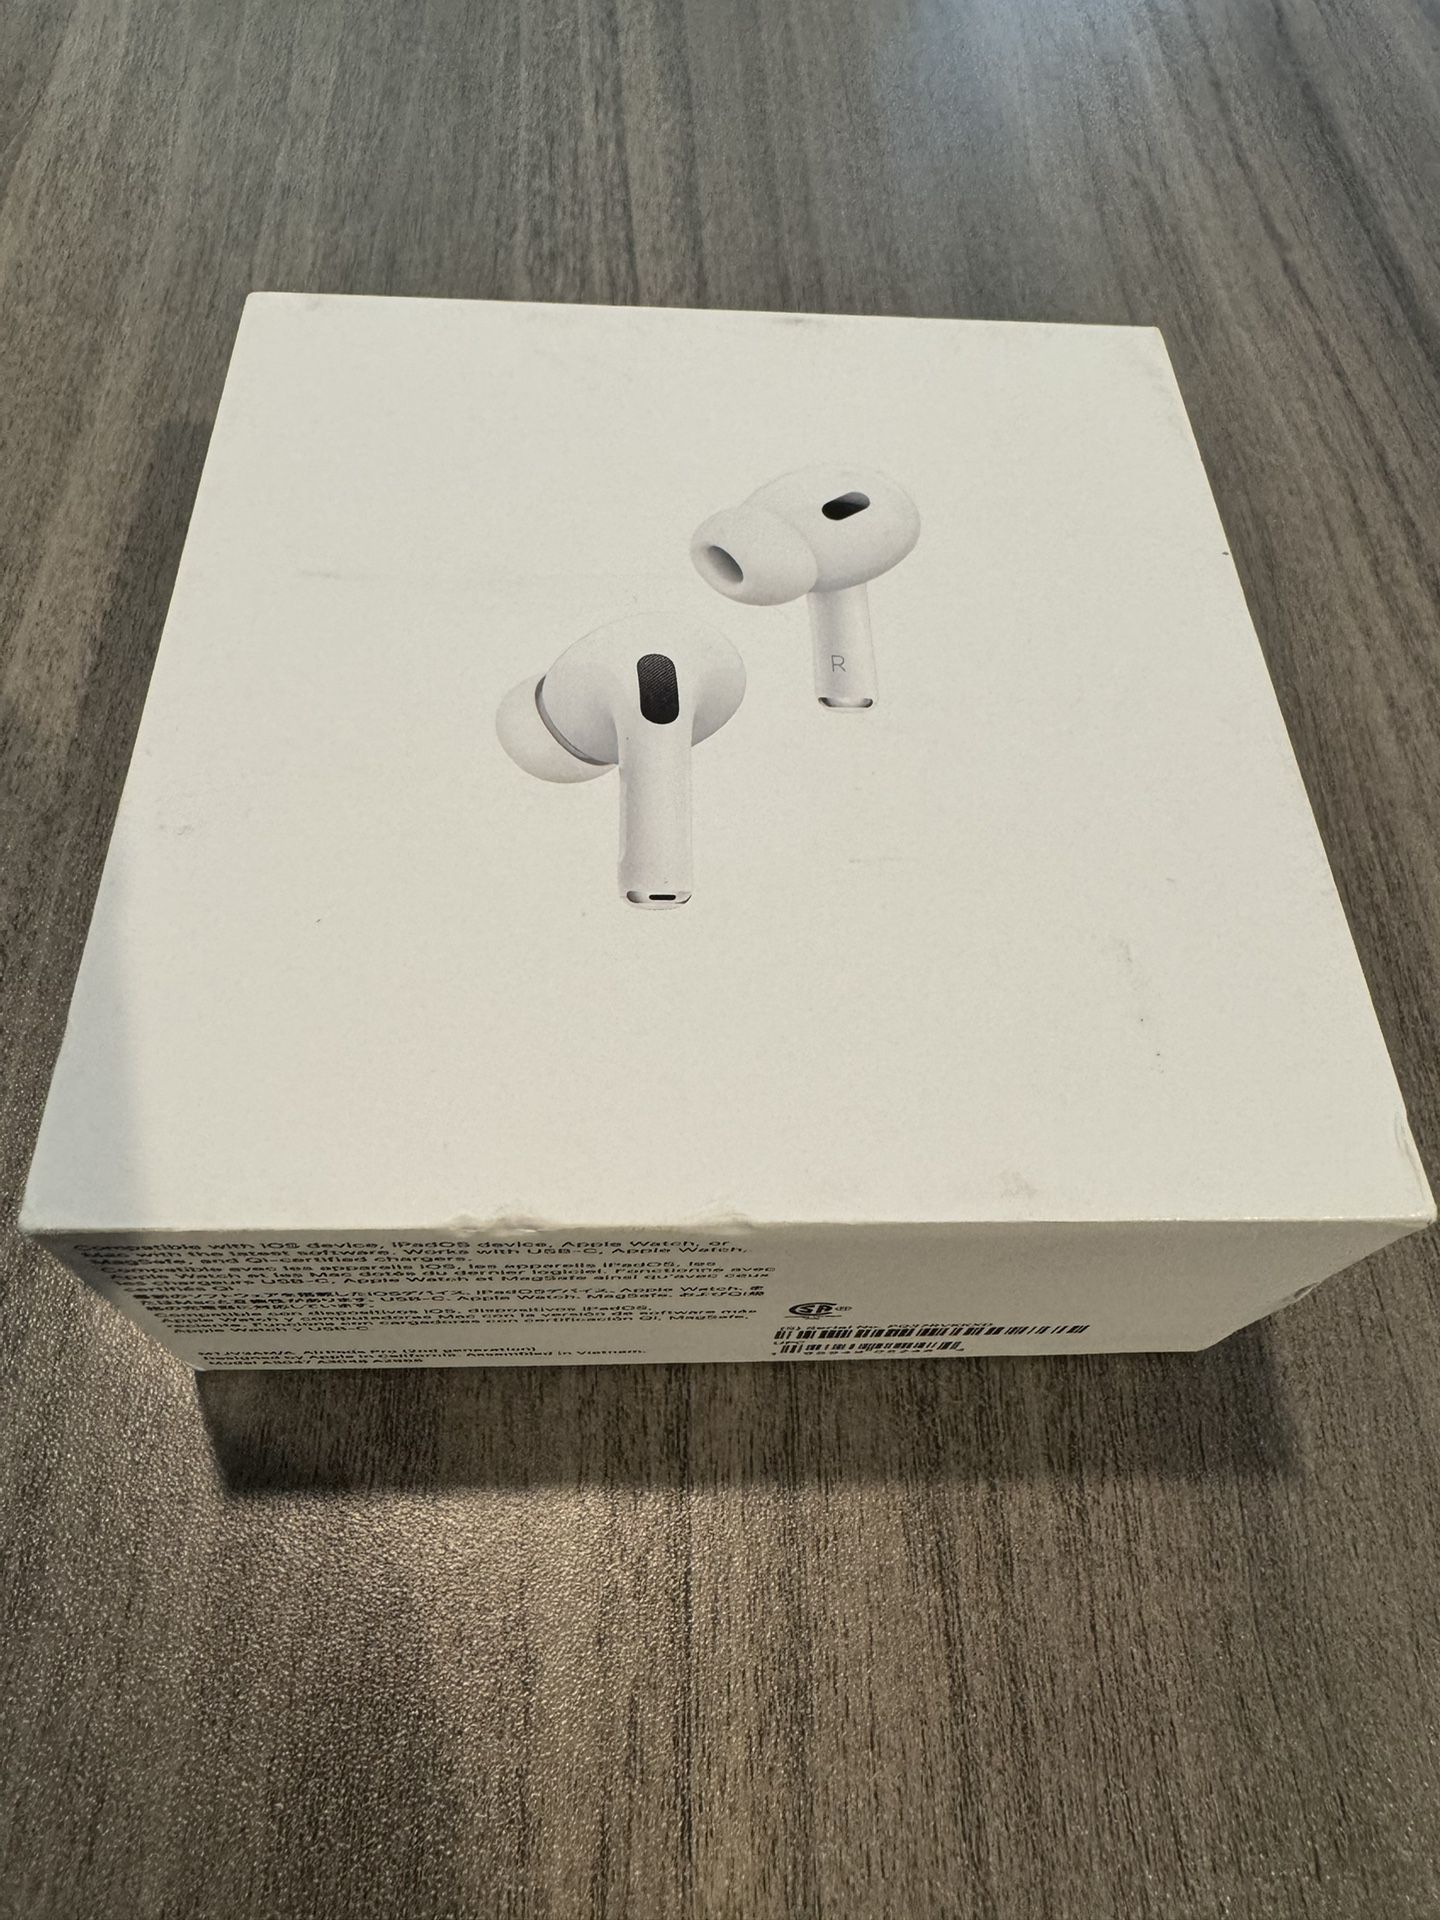 Brand New Apple AirPods Pro 2nd Generation 